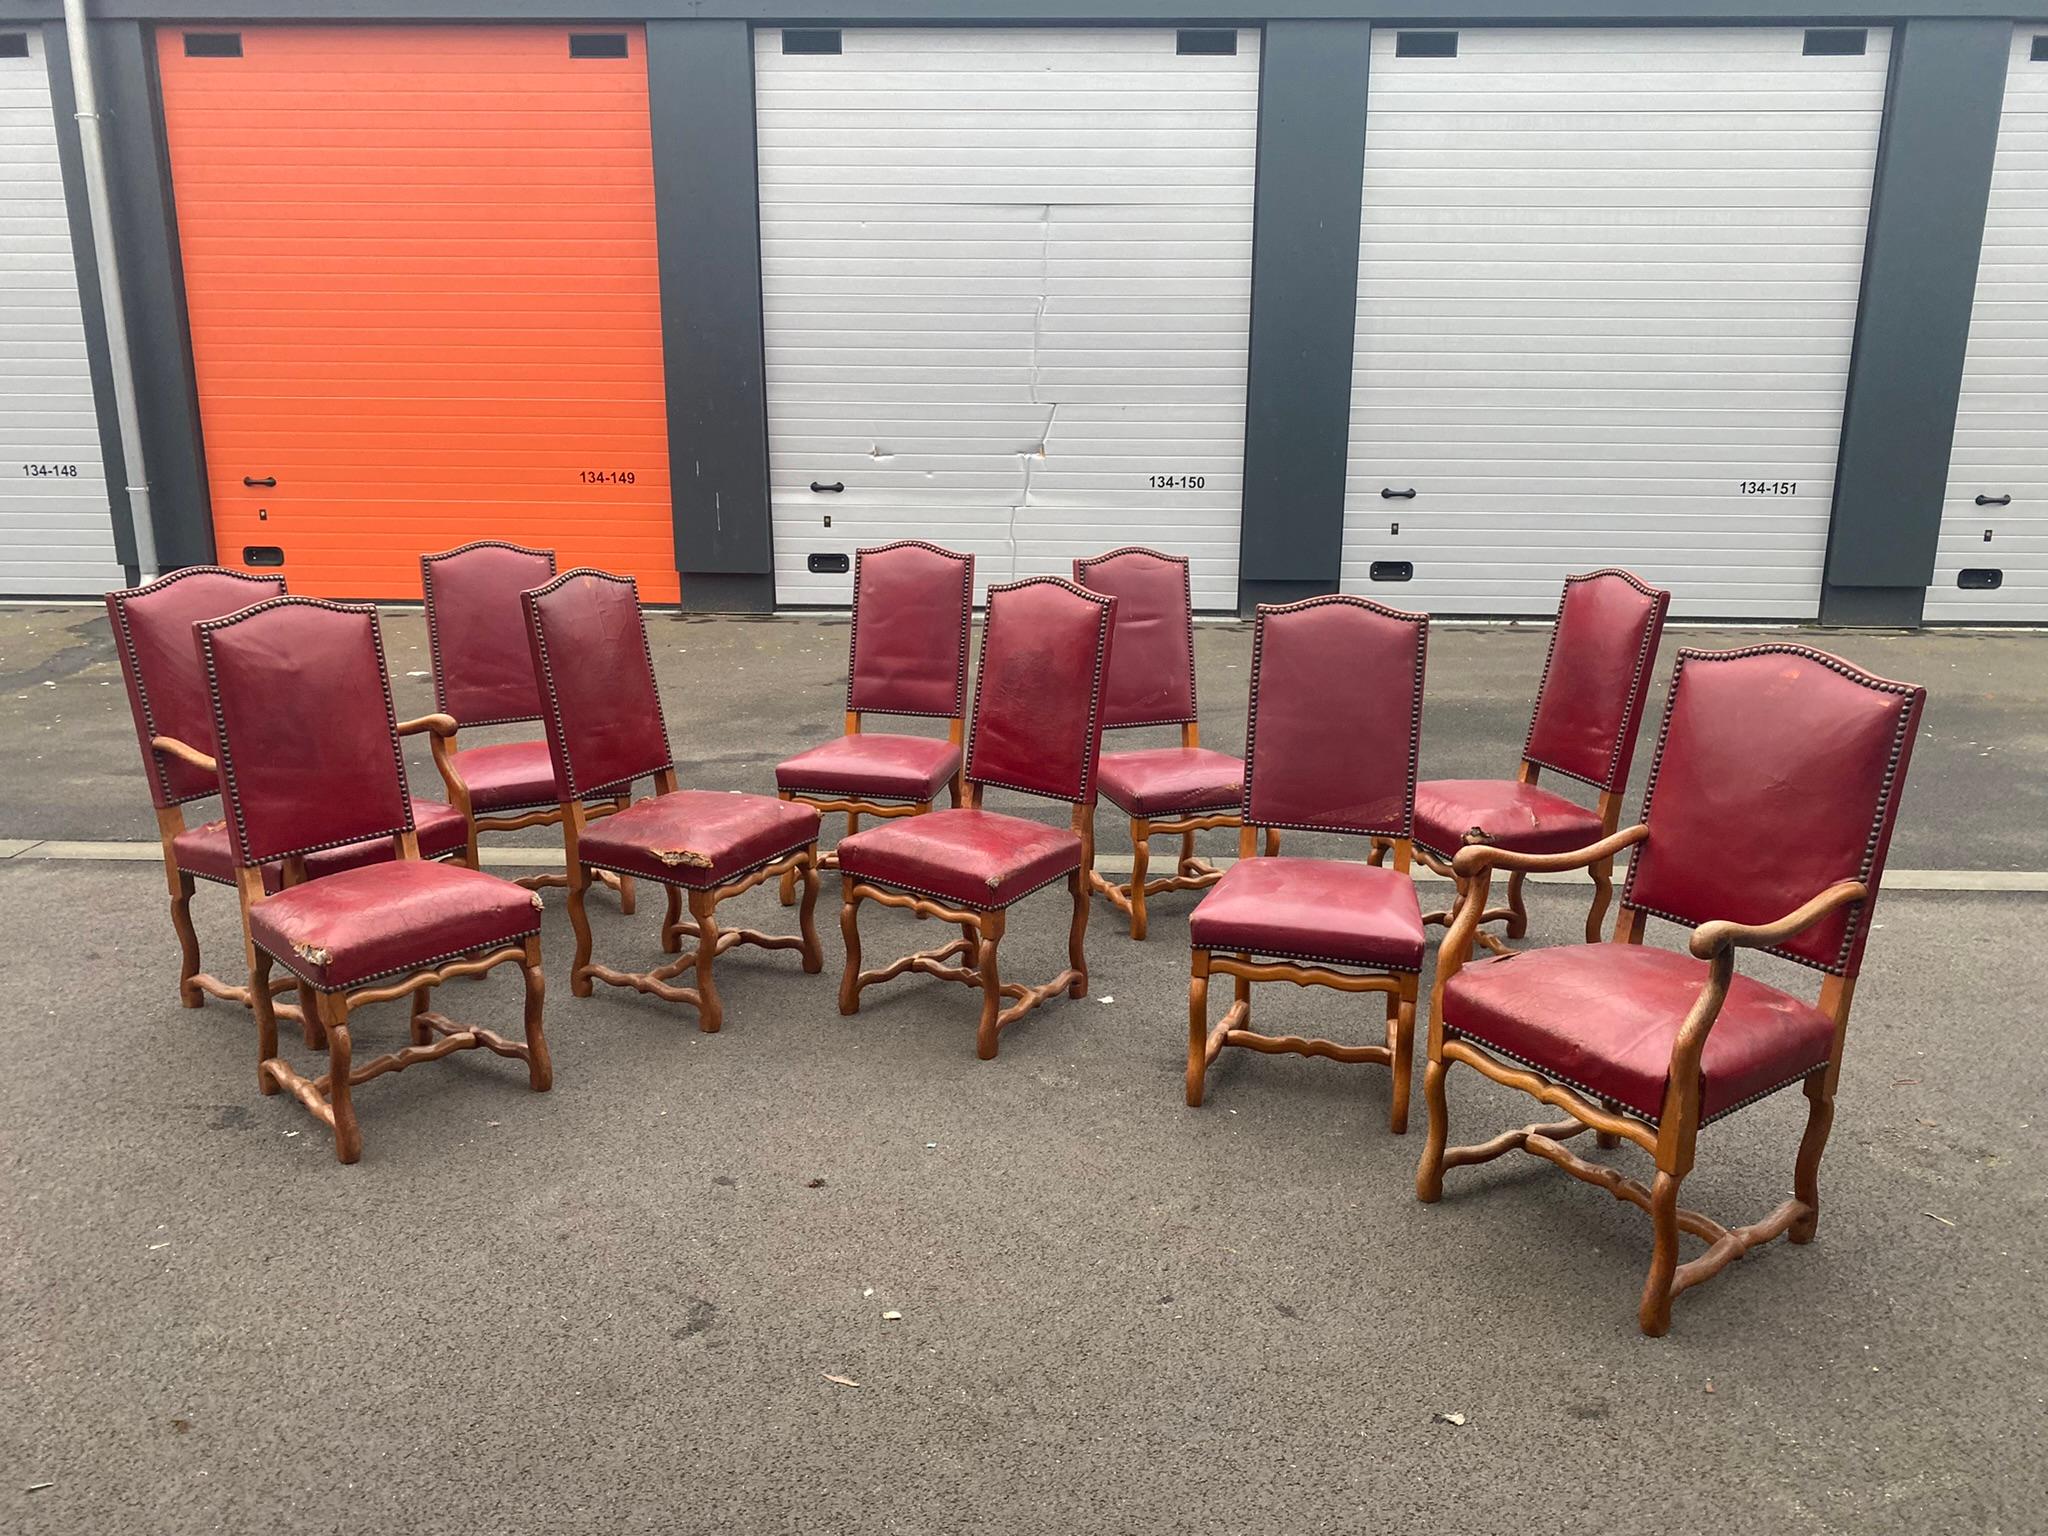 Set of 10 Antique French Louis XIII Style Os de Mouton dining side chairs
8 chairs, and 2 armchairs in oak and leather, upholstery to be completely redone;
structures in good condition.